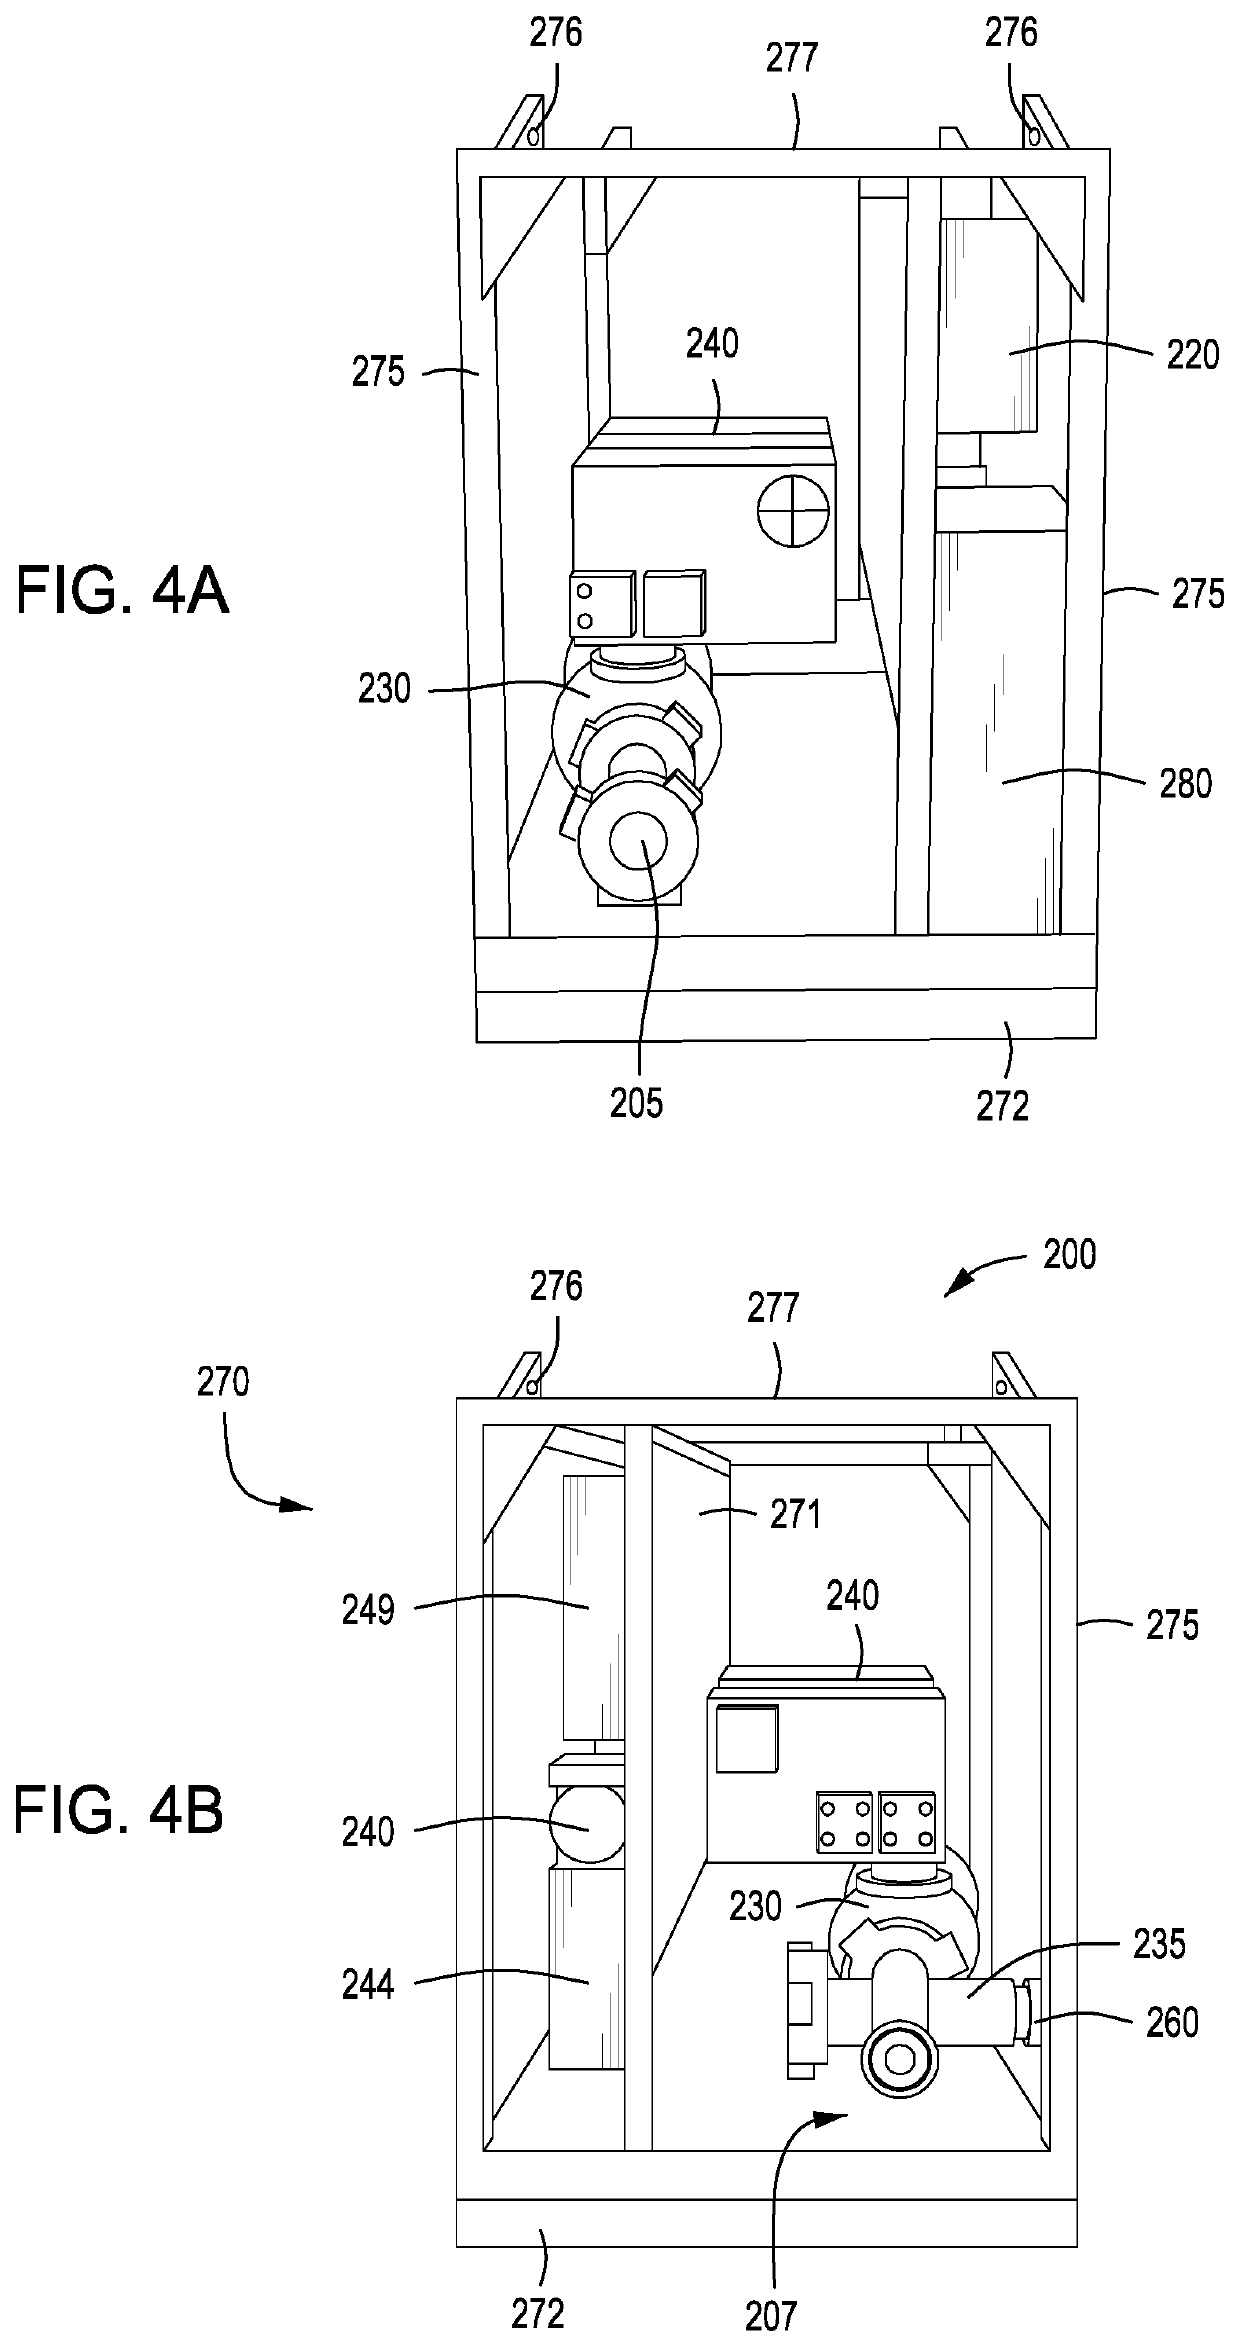 Method of servicing an electronically controlled PRV system